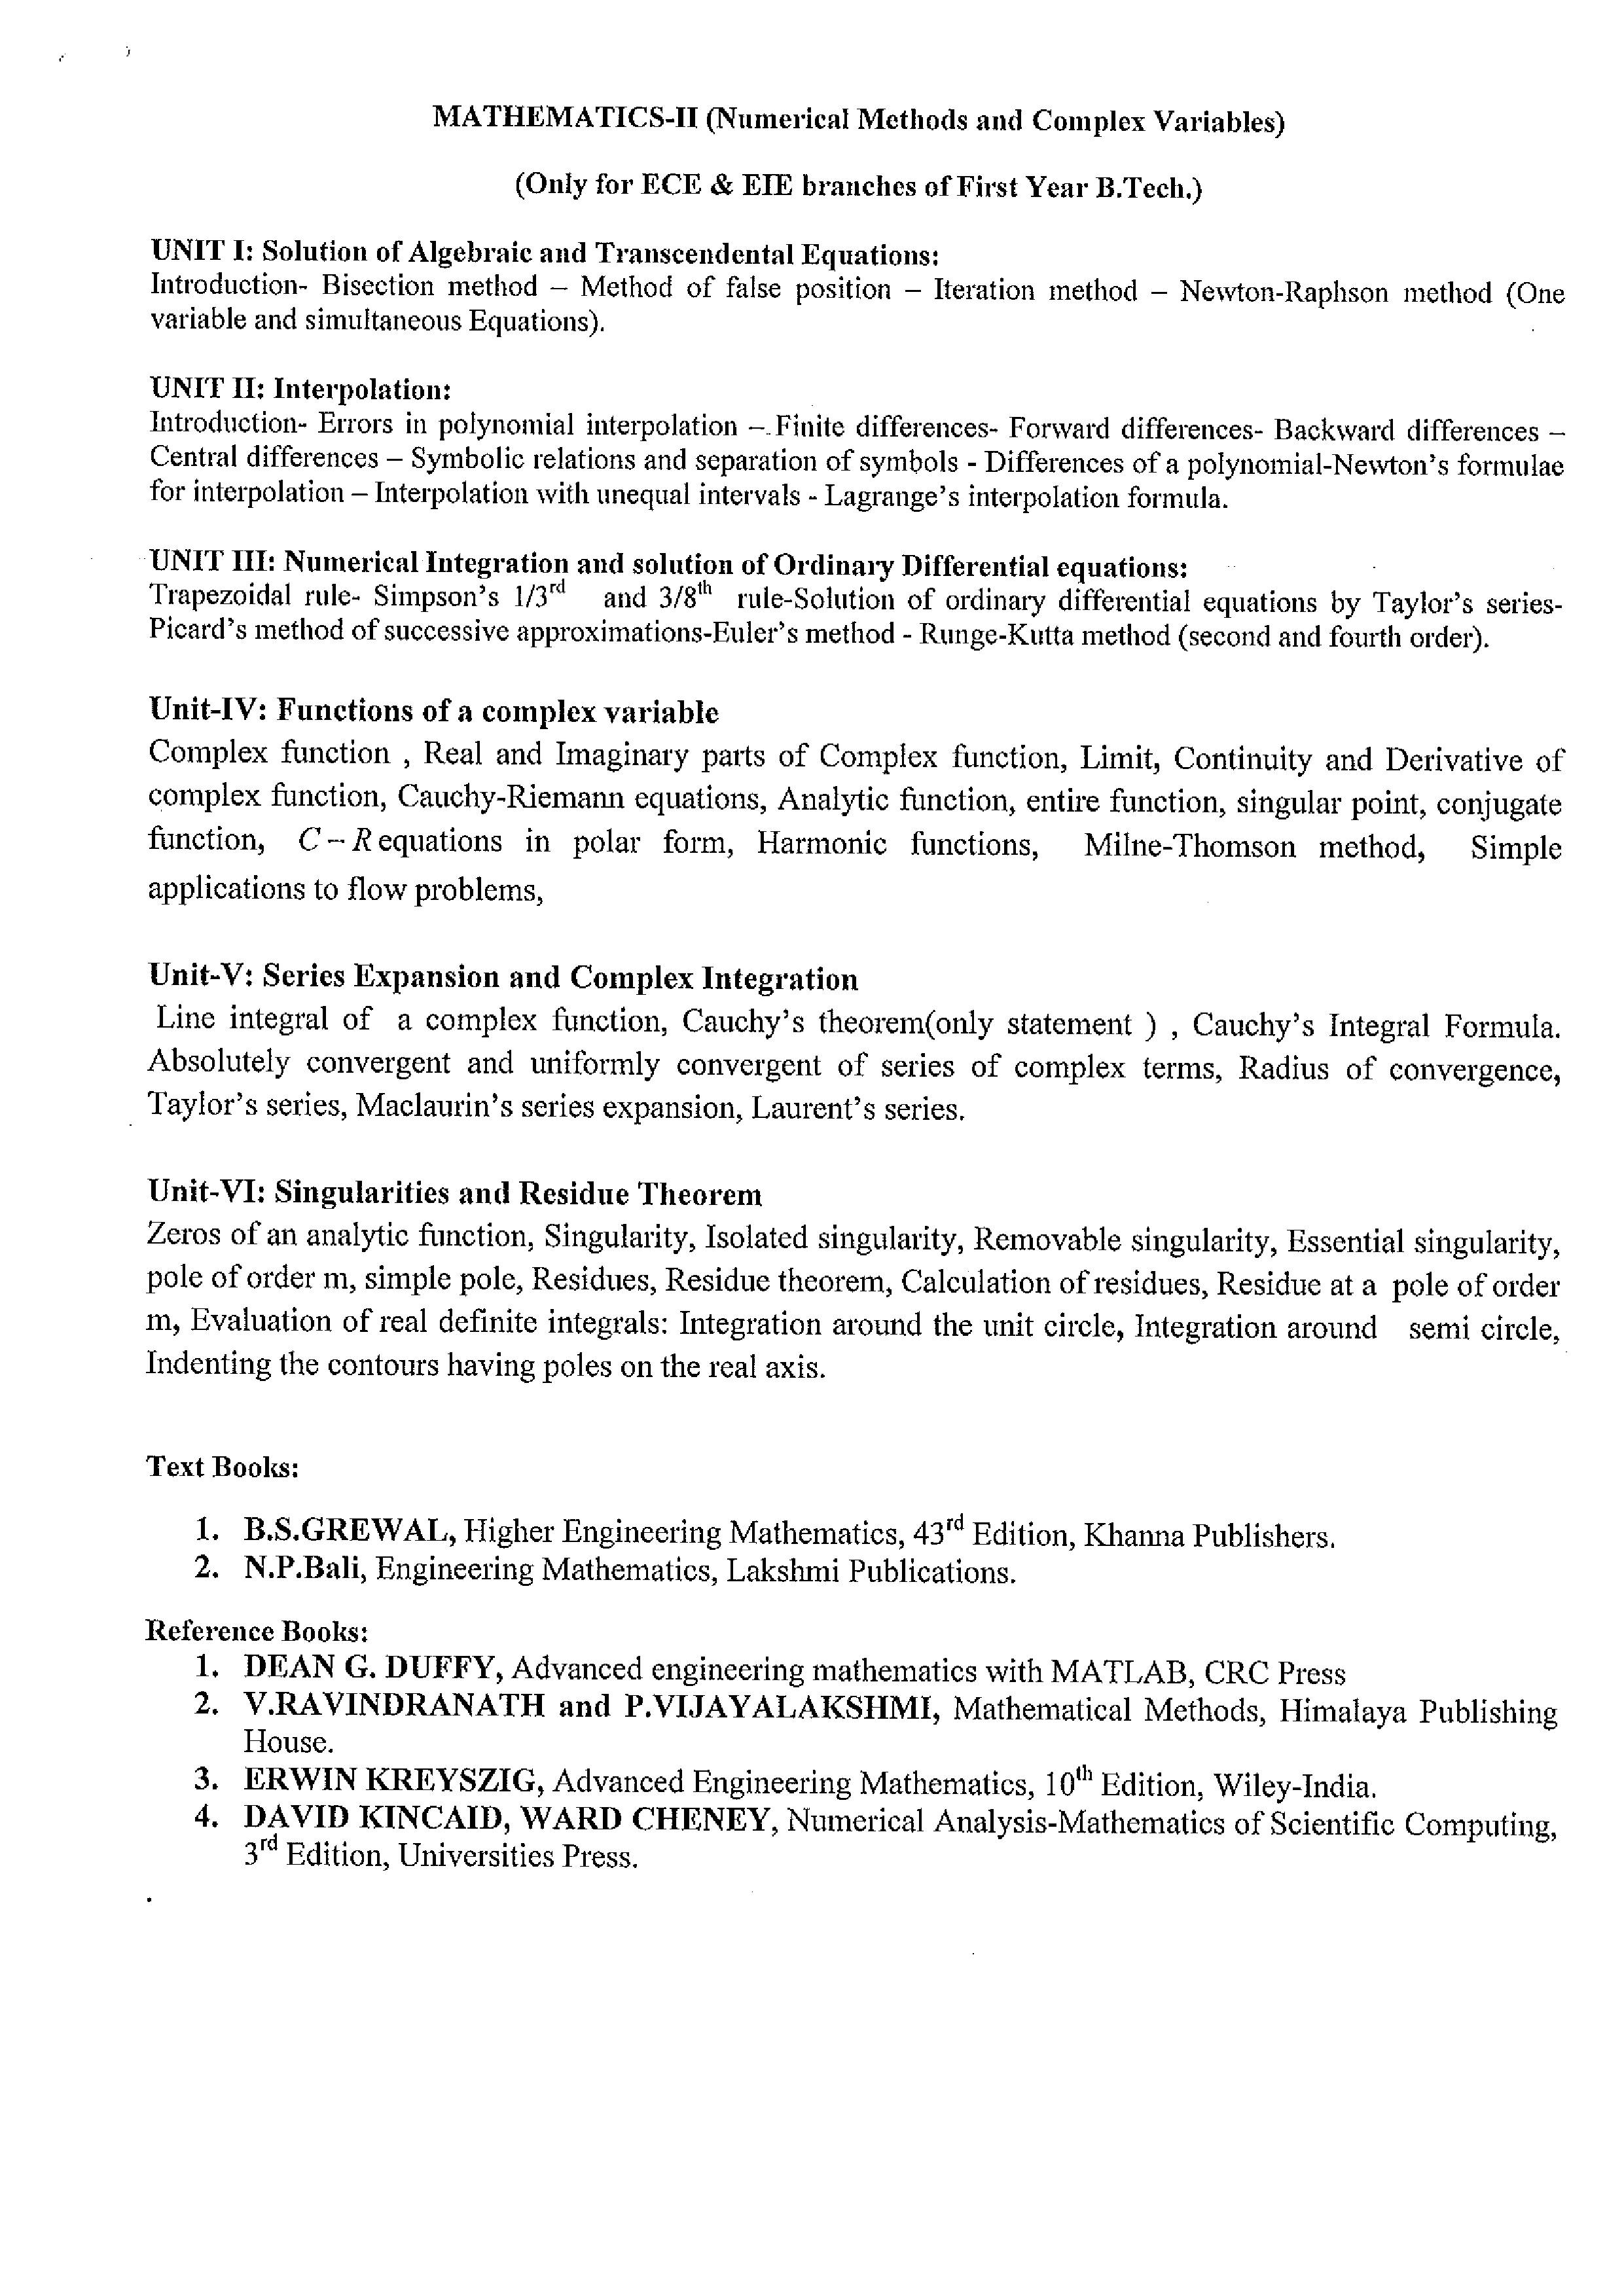 partial-modification-in-mathematics-ii-syllabus-pertaining-to-i-b-tech-i-semester-page2